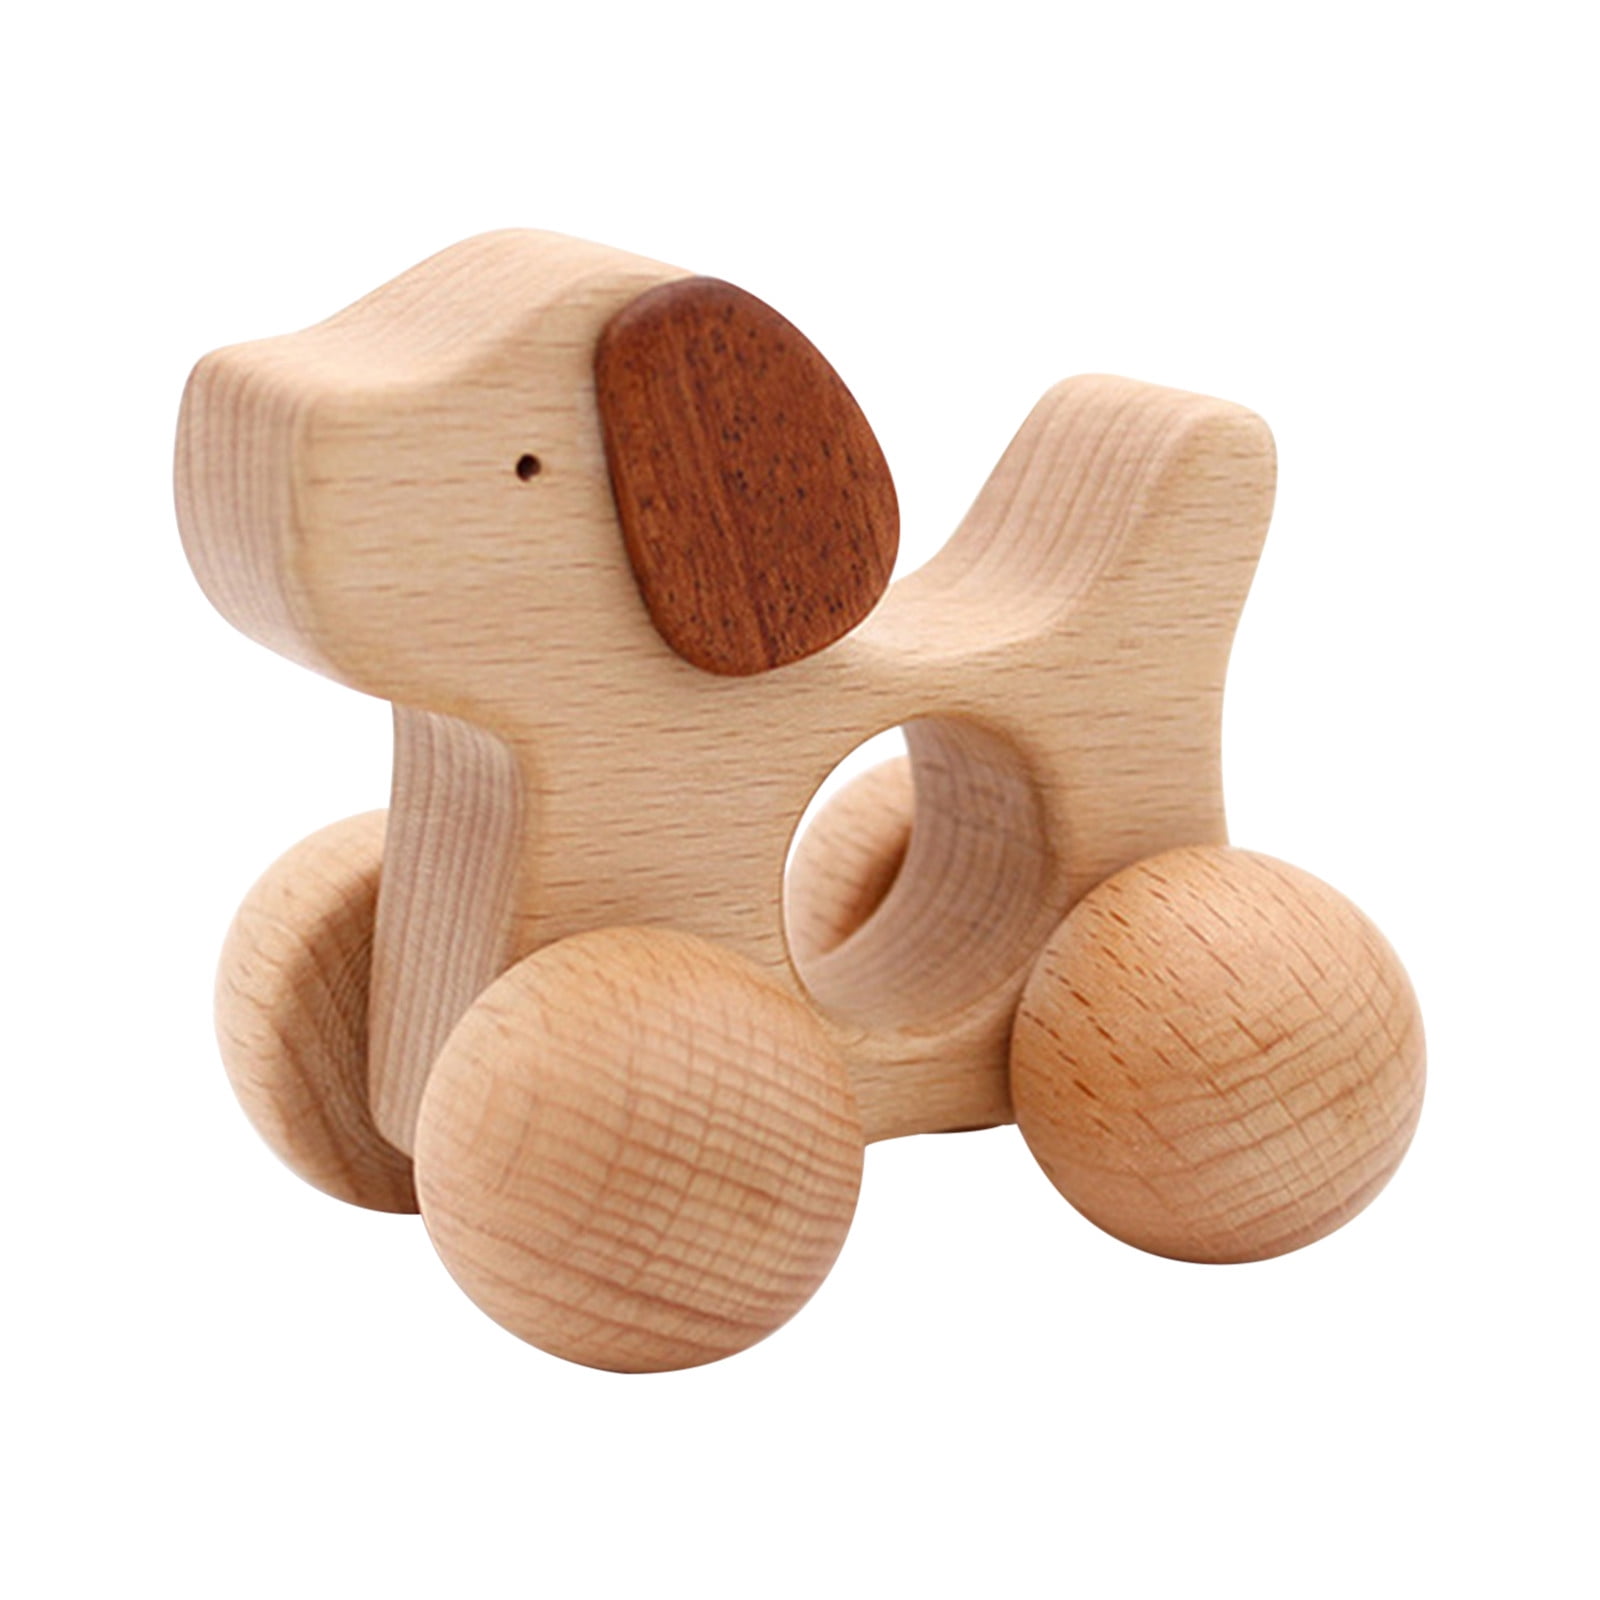 1pcs Natural wood Safety Wooden Teether tortoise shape Baby Molar Stick Toy 